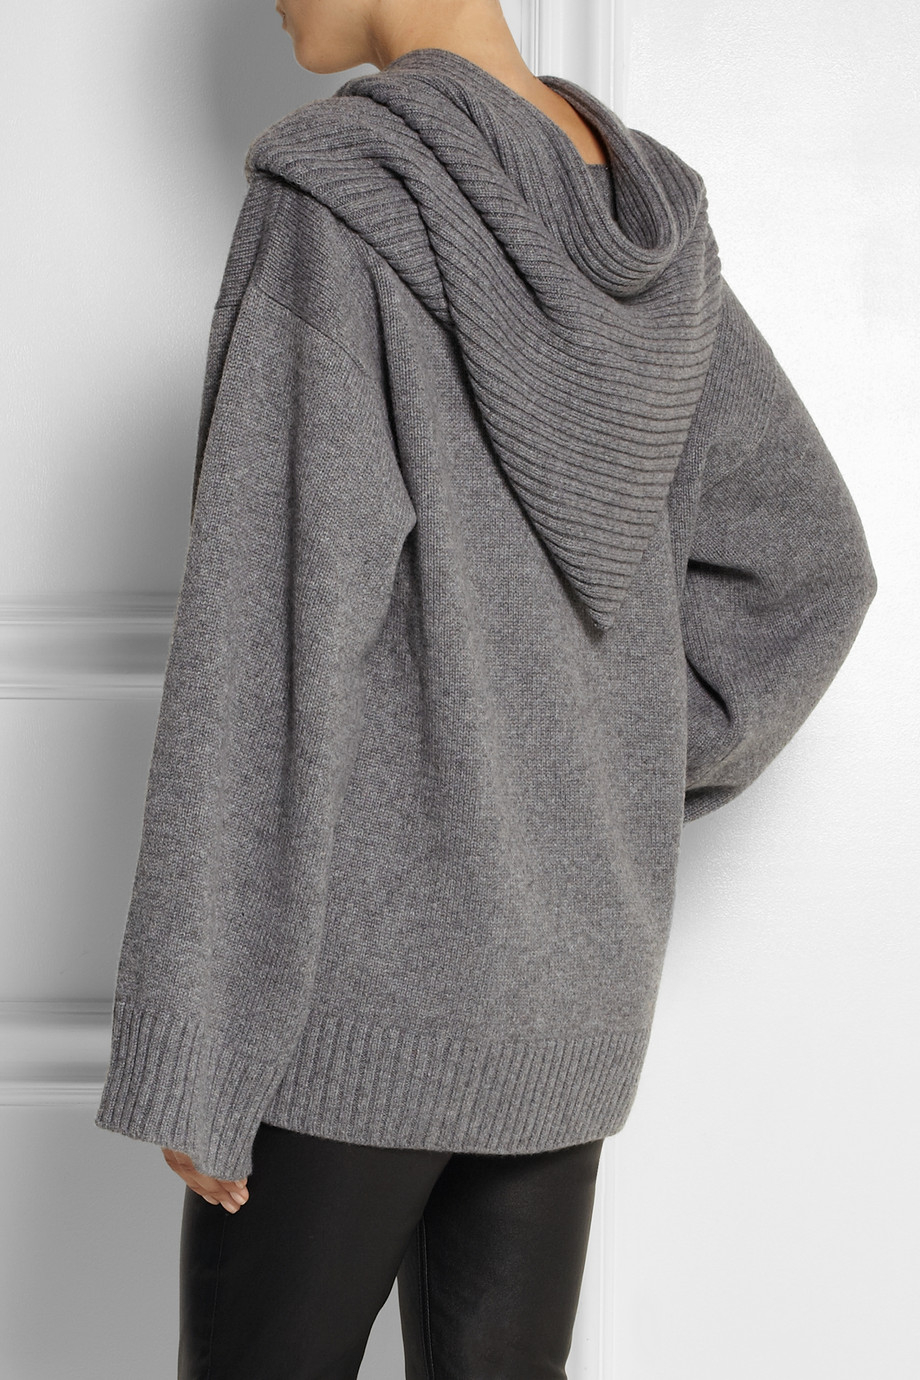 Lyst - Dolce & gabbana Hooded Cashmere Sweater in Gray